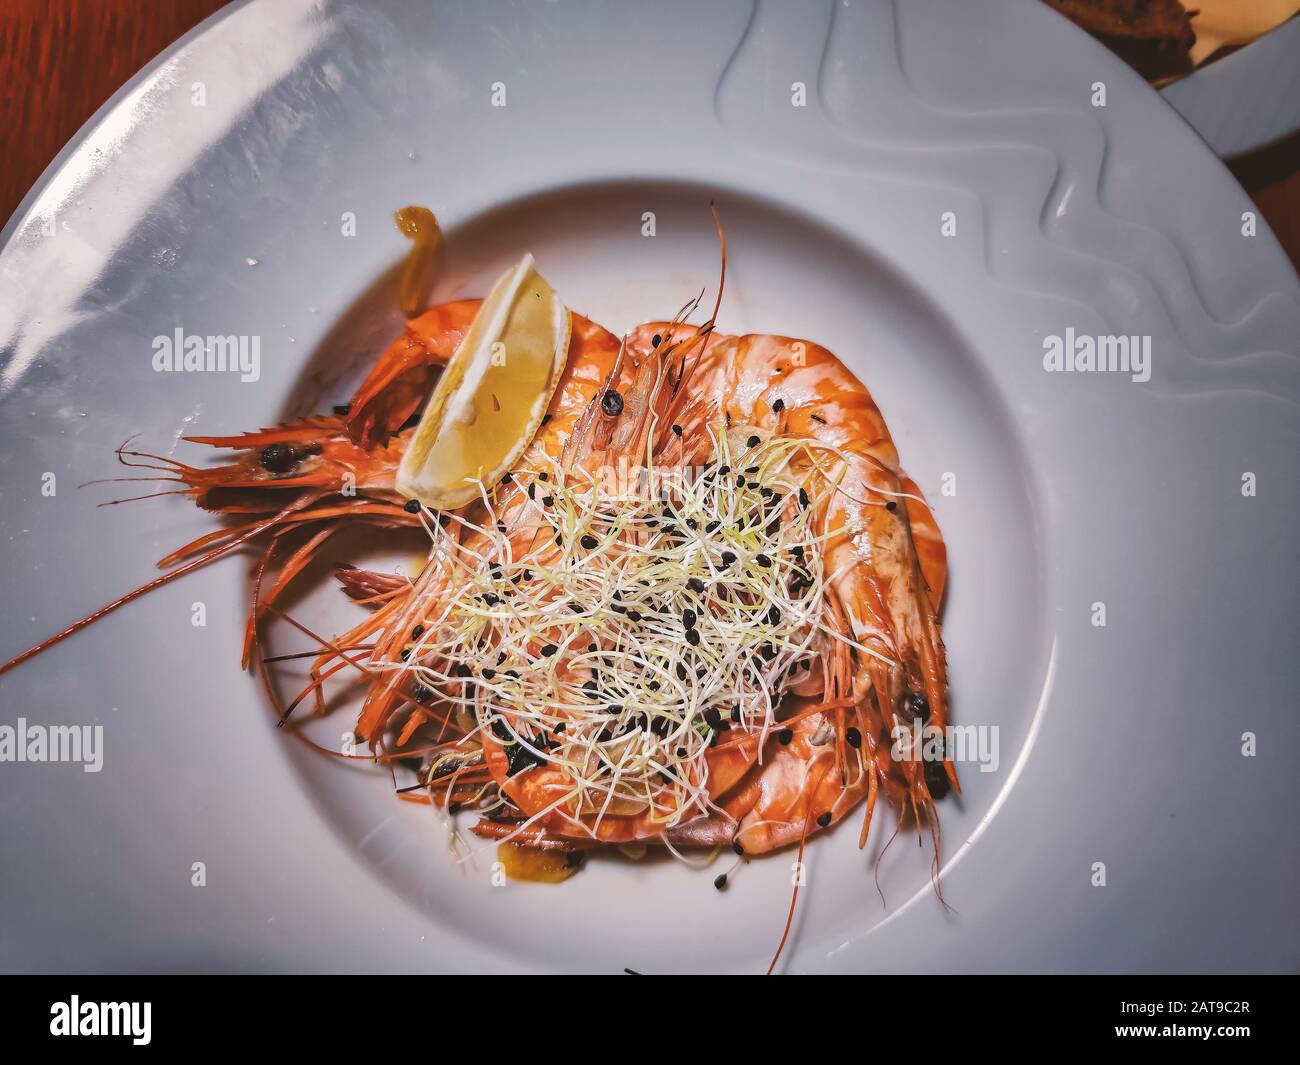 Grilled large tiger prawns with garlic, lemon and herbs on a large white plate. Stock Photo